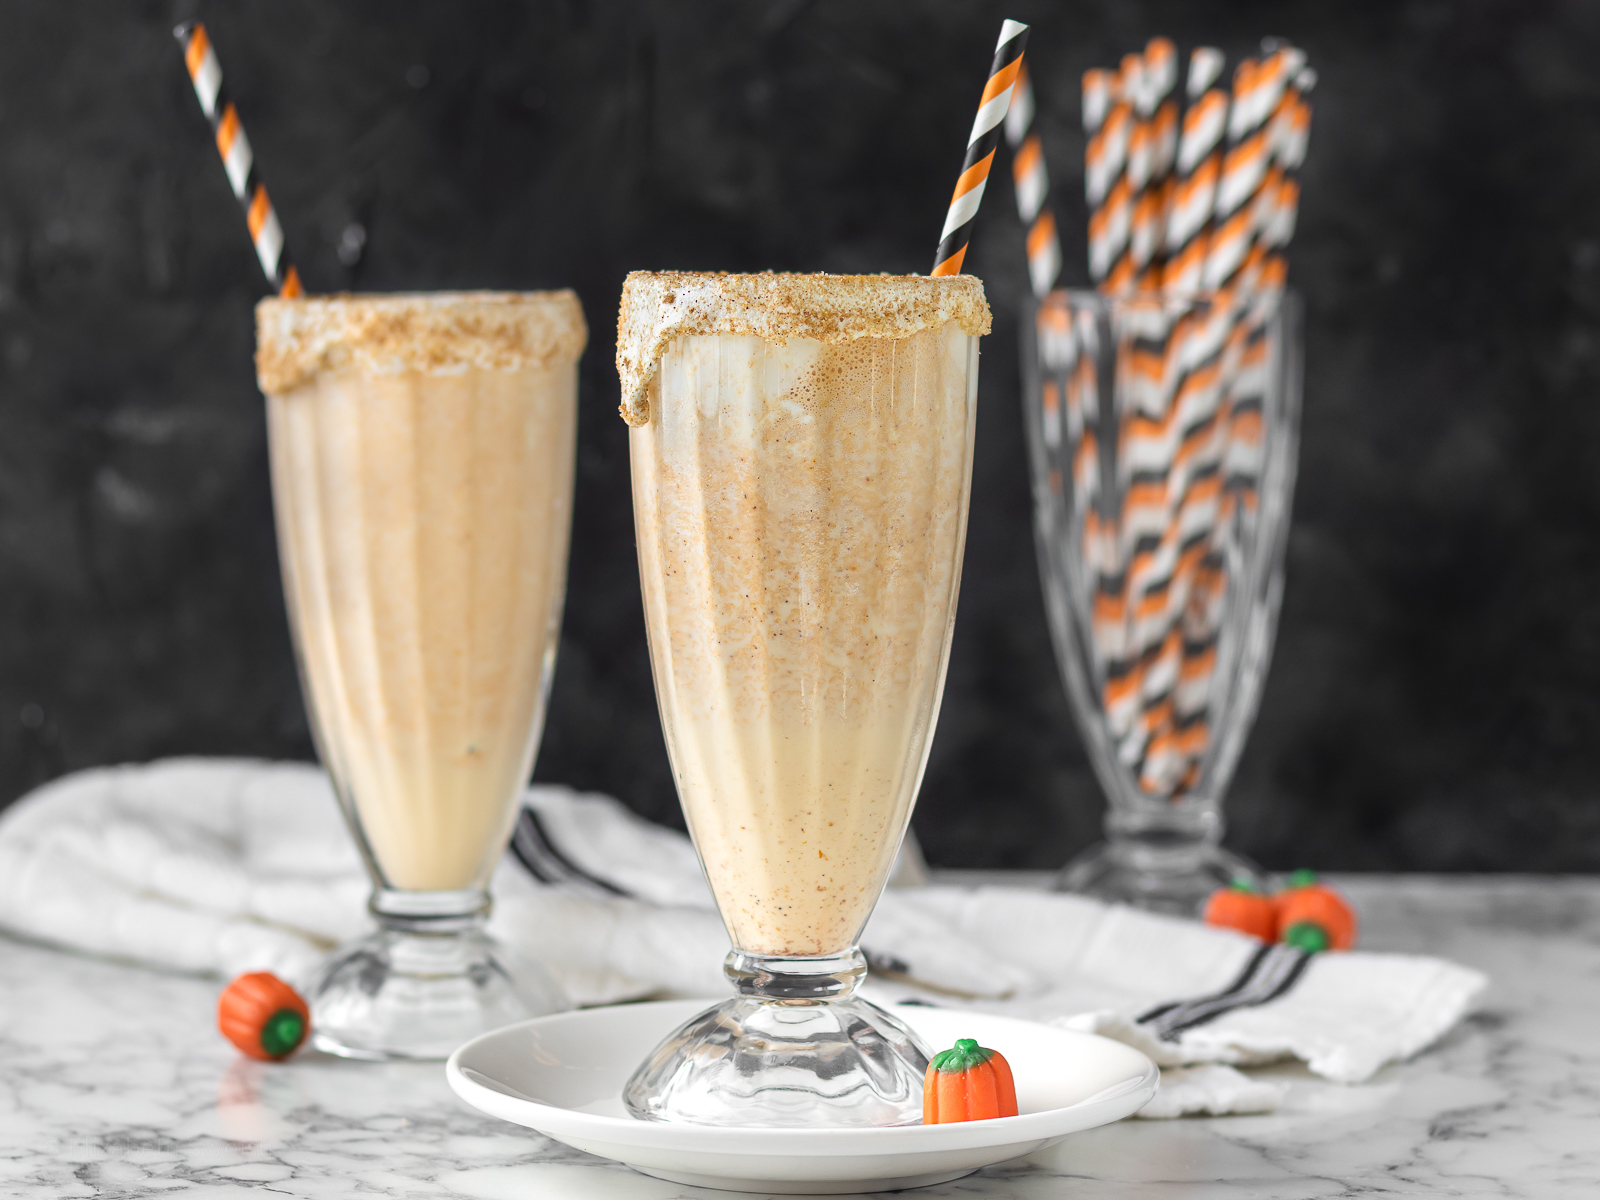 Two tall glasses of marshmallow and pumpkin flavored milkshakes with a orange and black striped straw and mini pumpkin candies on the side.